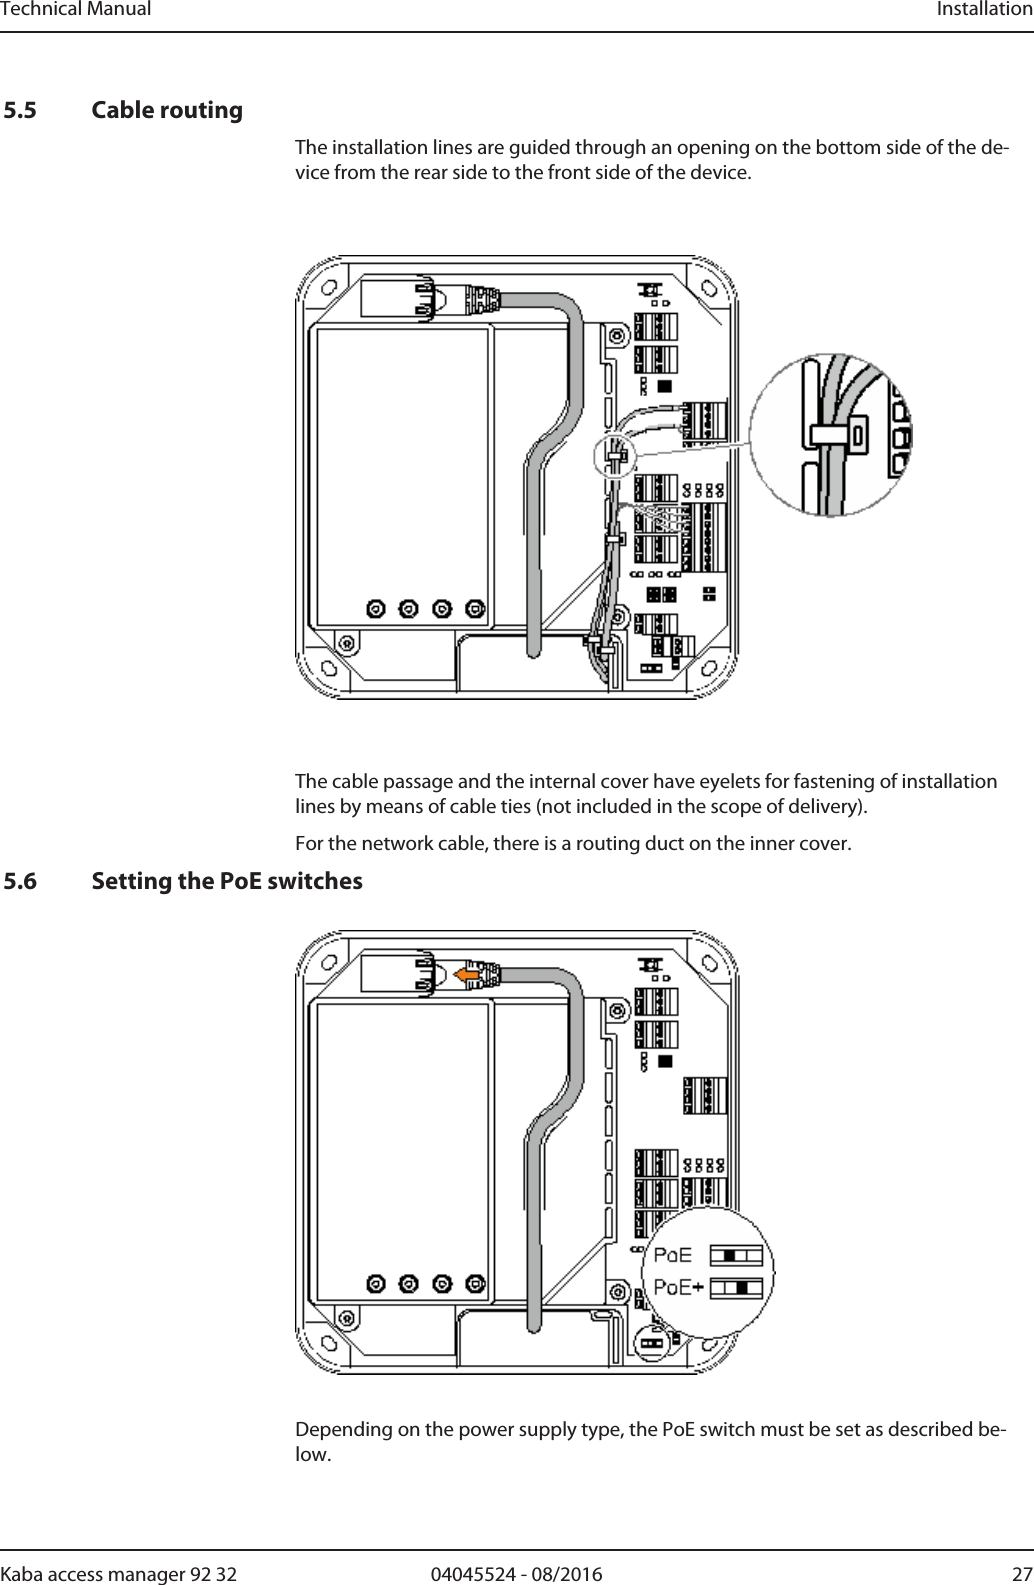 Technical Manual Installation2704045524 - 08/2016Kaba access manager 92 325.5 Cable routingThe installation lines are guided through an opening on the bottom side of the de-vice from the rear side to the front side of the device.The cable passage and the internal cover have eyelets for fastening of installationlines by means of cable ties (not included in the scope of delivery).For the network cable, there is a routing duct on the inner cover.5.6 Setting the PoE switchesDepending on the power supply type, the PoE switch must be set as described be-low.